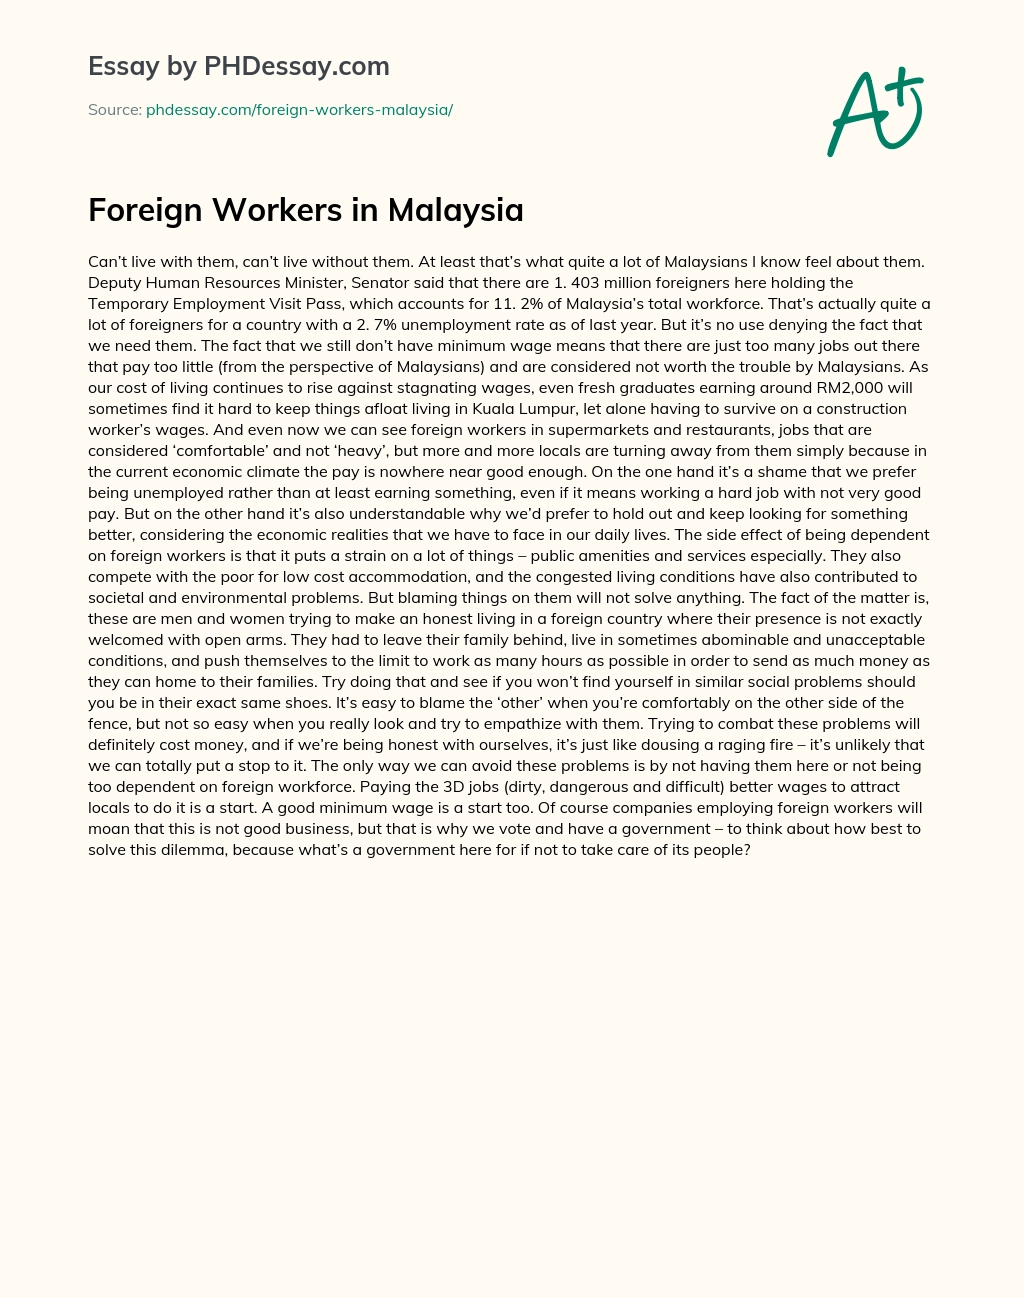 Foreign Workers in Malaysia essay